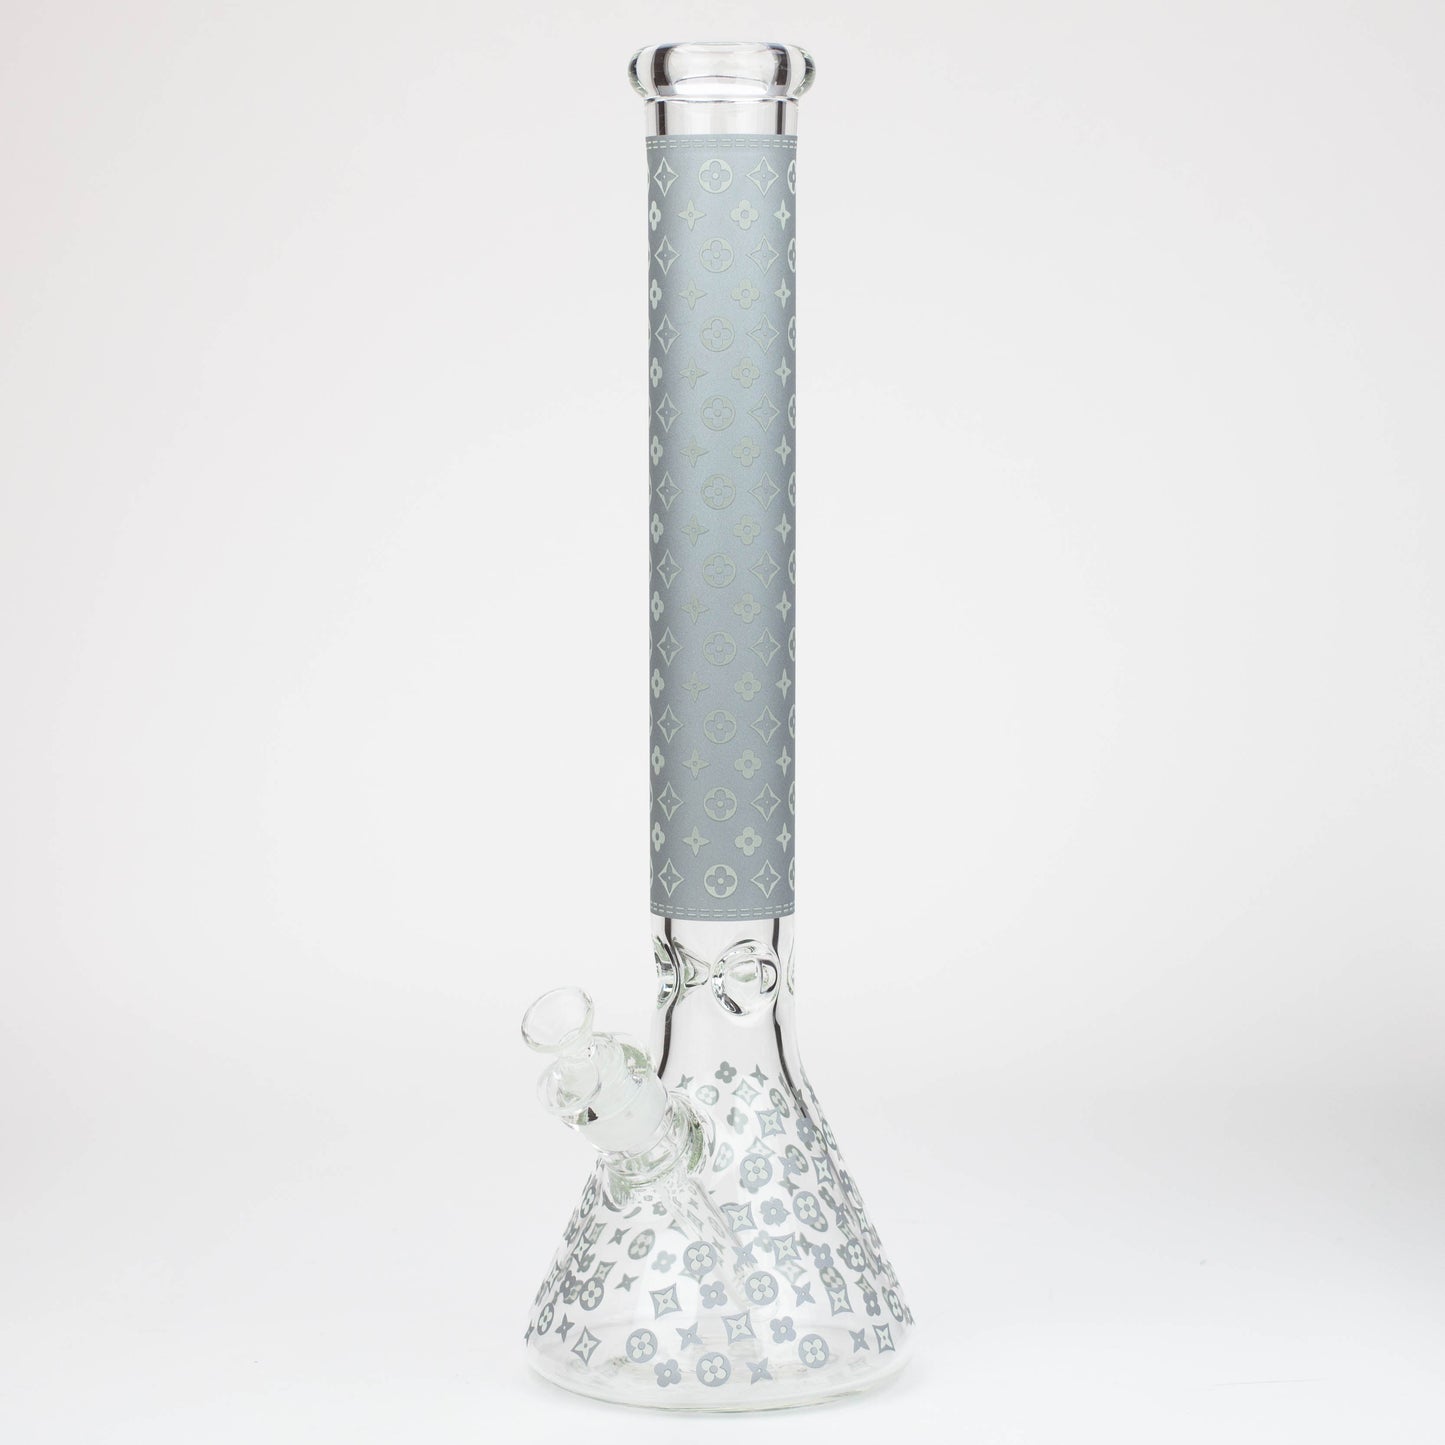 18" LV Glow in the dark 7 mm glass water bong_9